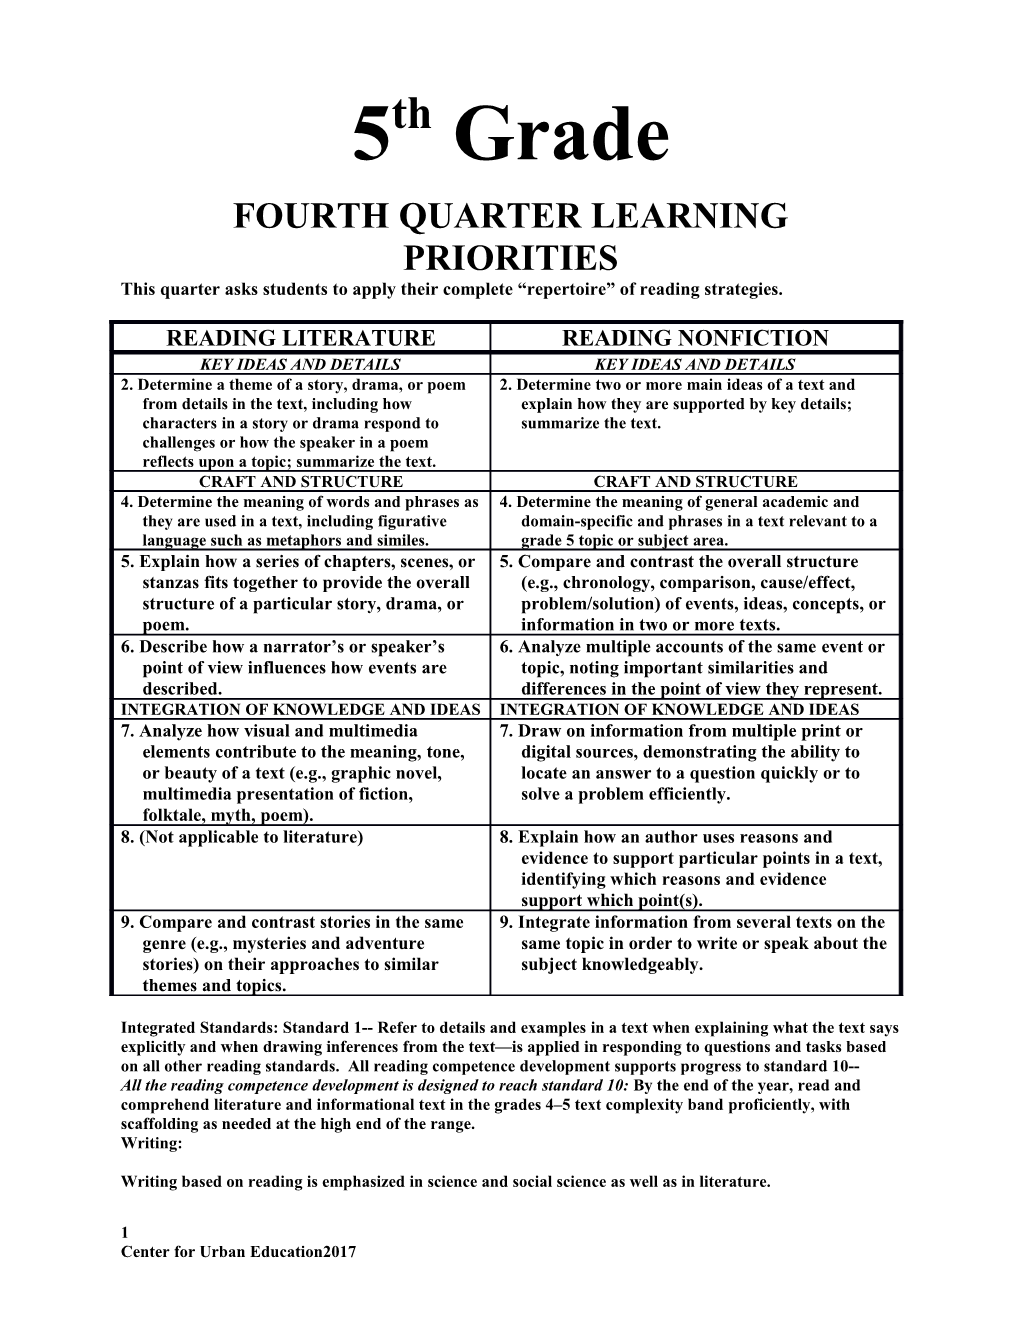 This Quarter Asks Students to Apply Their Complete Repertoire of Reading Strategies